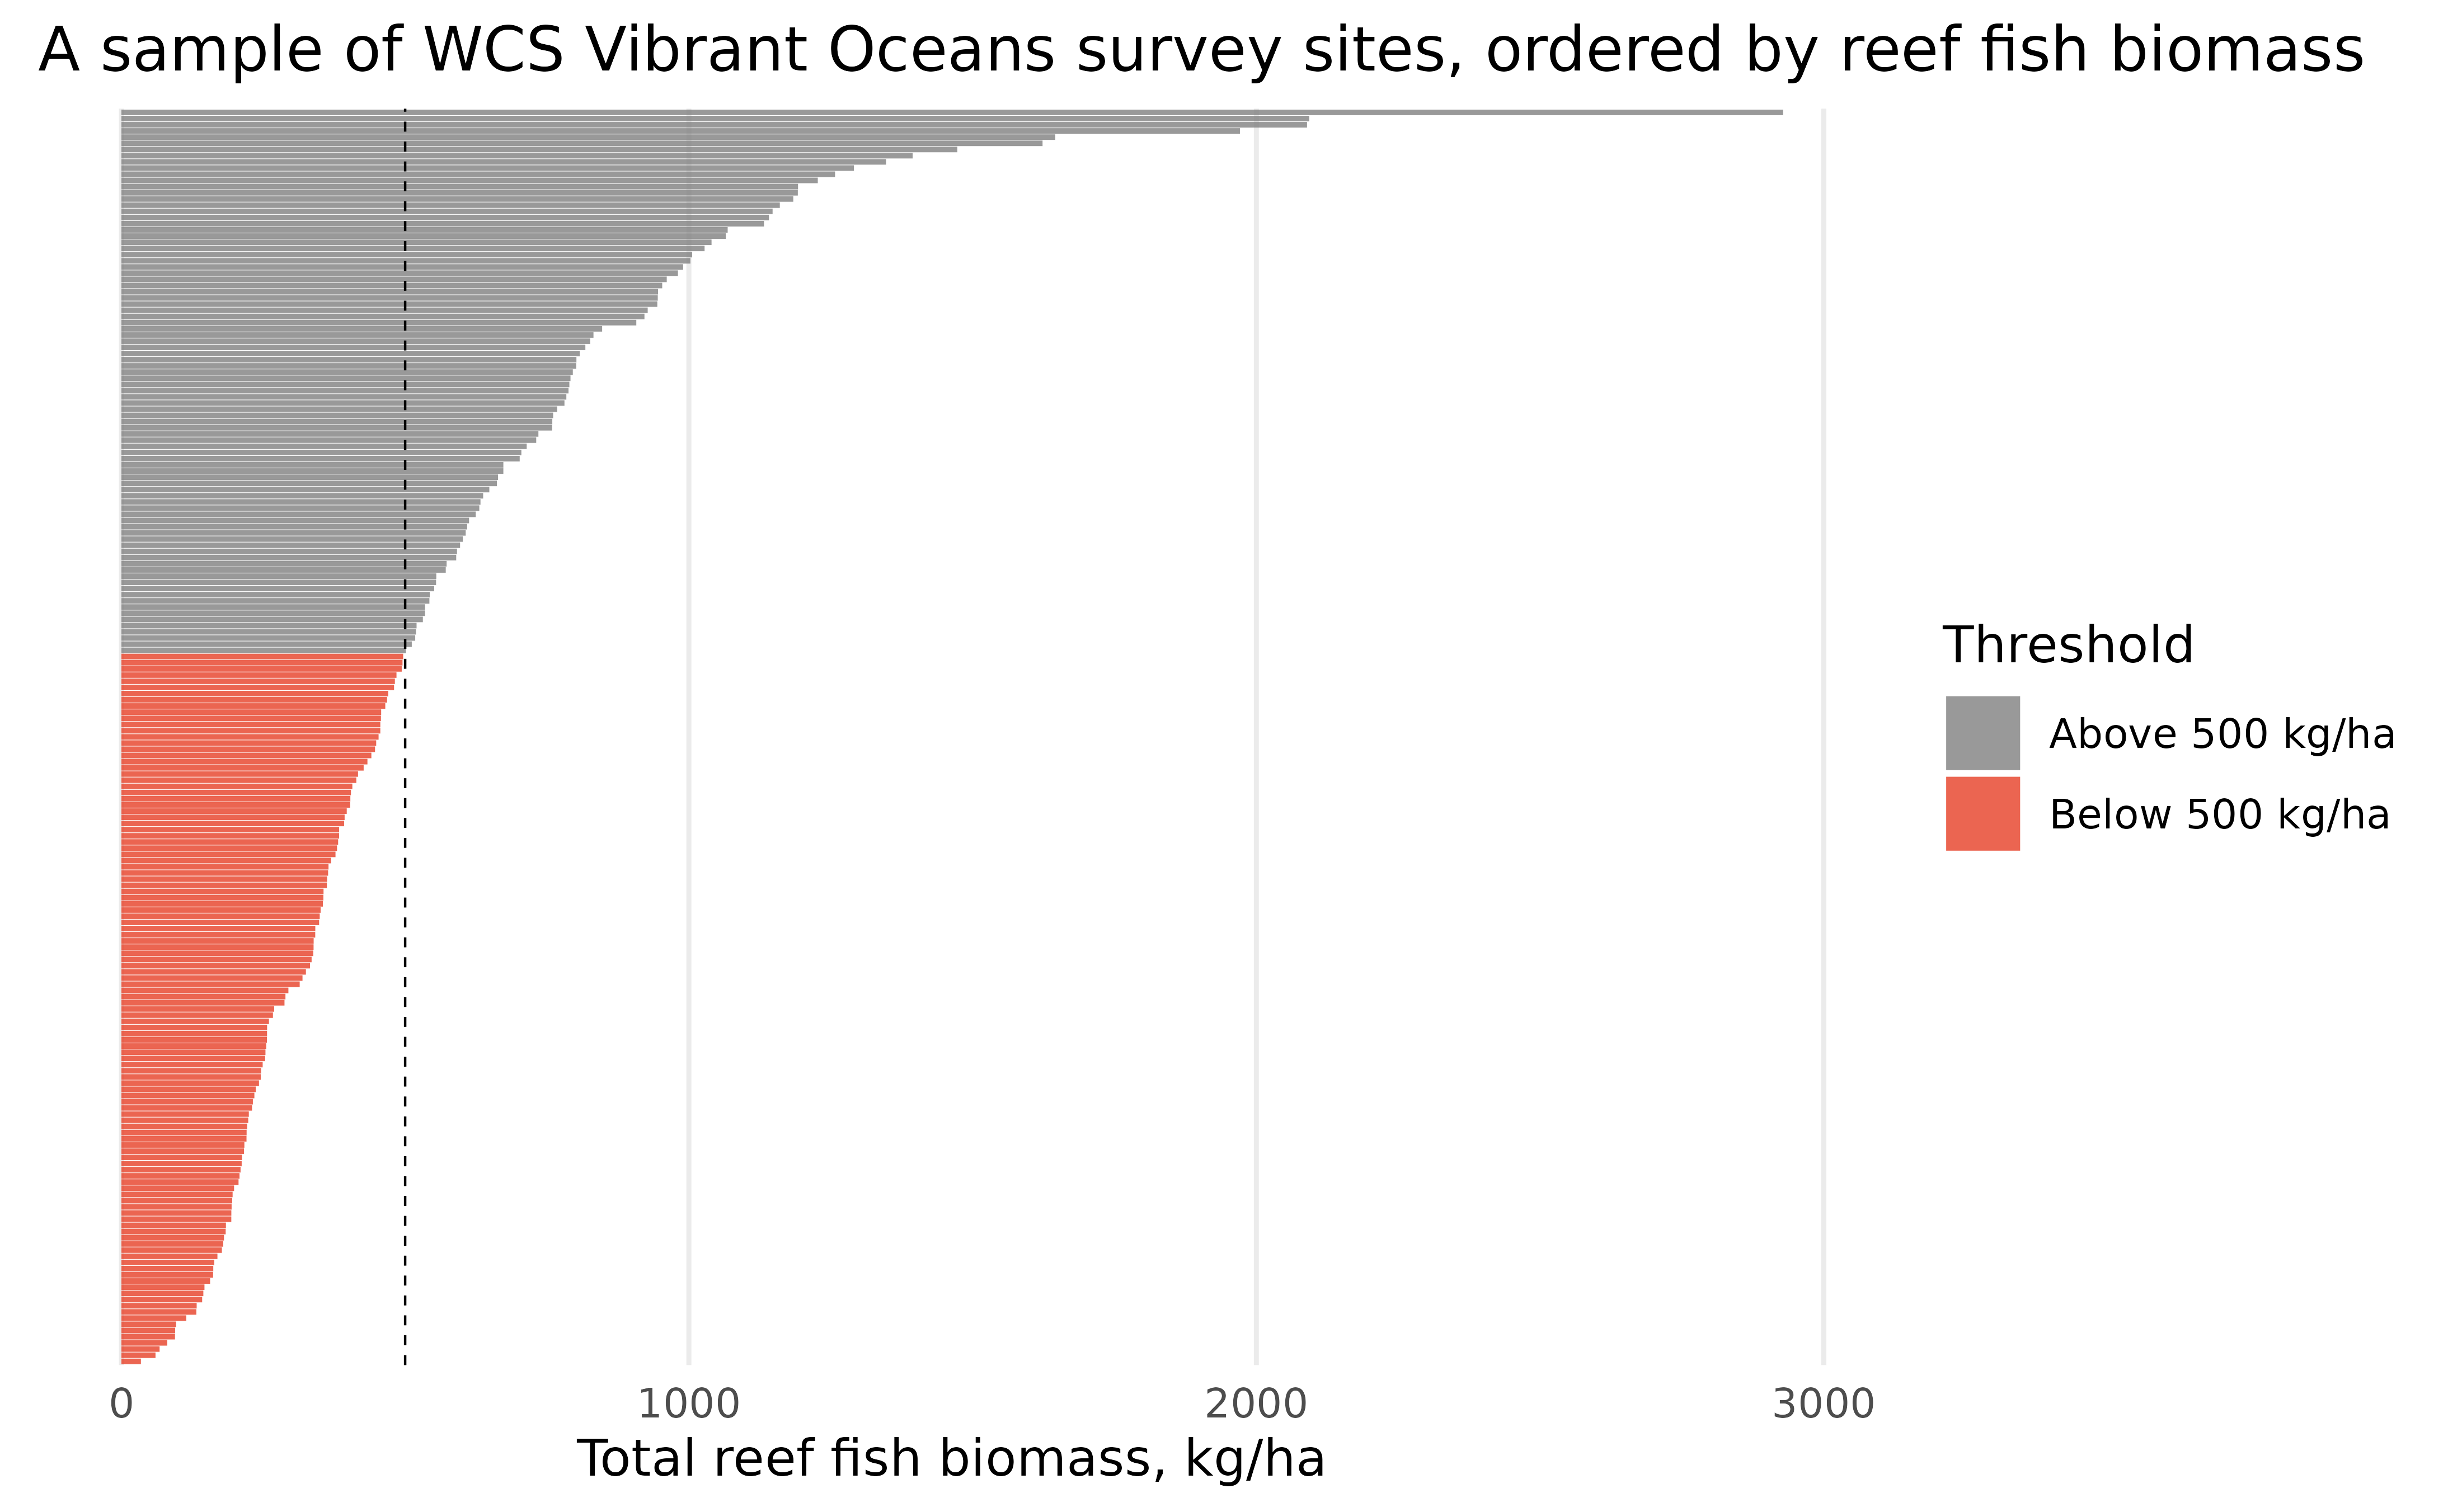 A bar chart showing total reef fish biomass in kilograms per hectare (on the axis) by site (on the y axis). The sites are shown in order of their biomass, from highest to lowest. The bars are grey if the biomass is above 500 kg and red if it is below 500kg. There is a vertical dashed line at the 500kg mark. The plot is titled 'A sample of WCS Vibrant Oceans survey sites, ordered by reef fish biomass.'